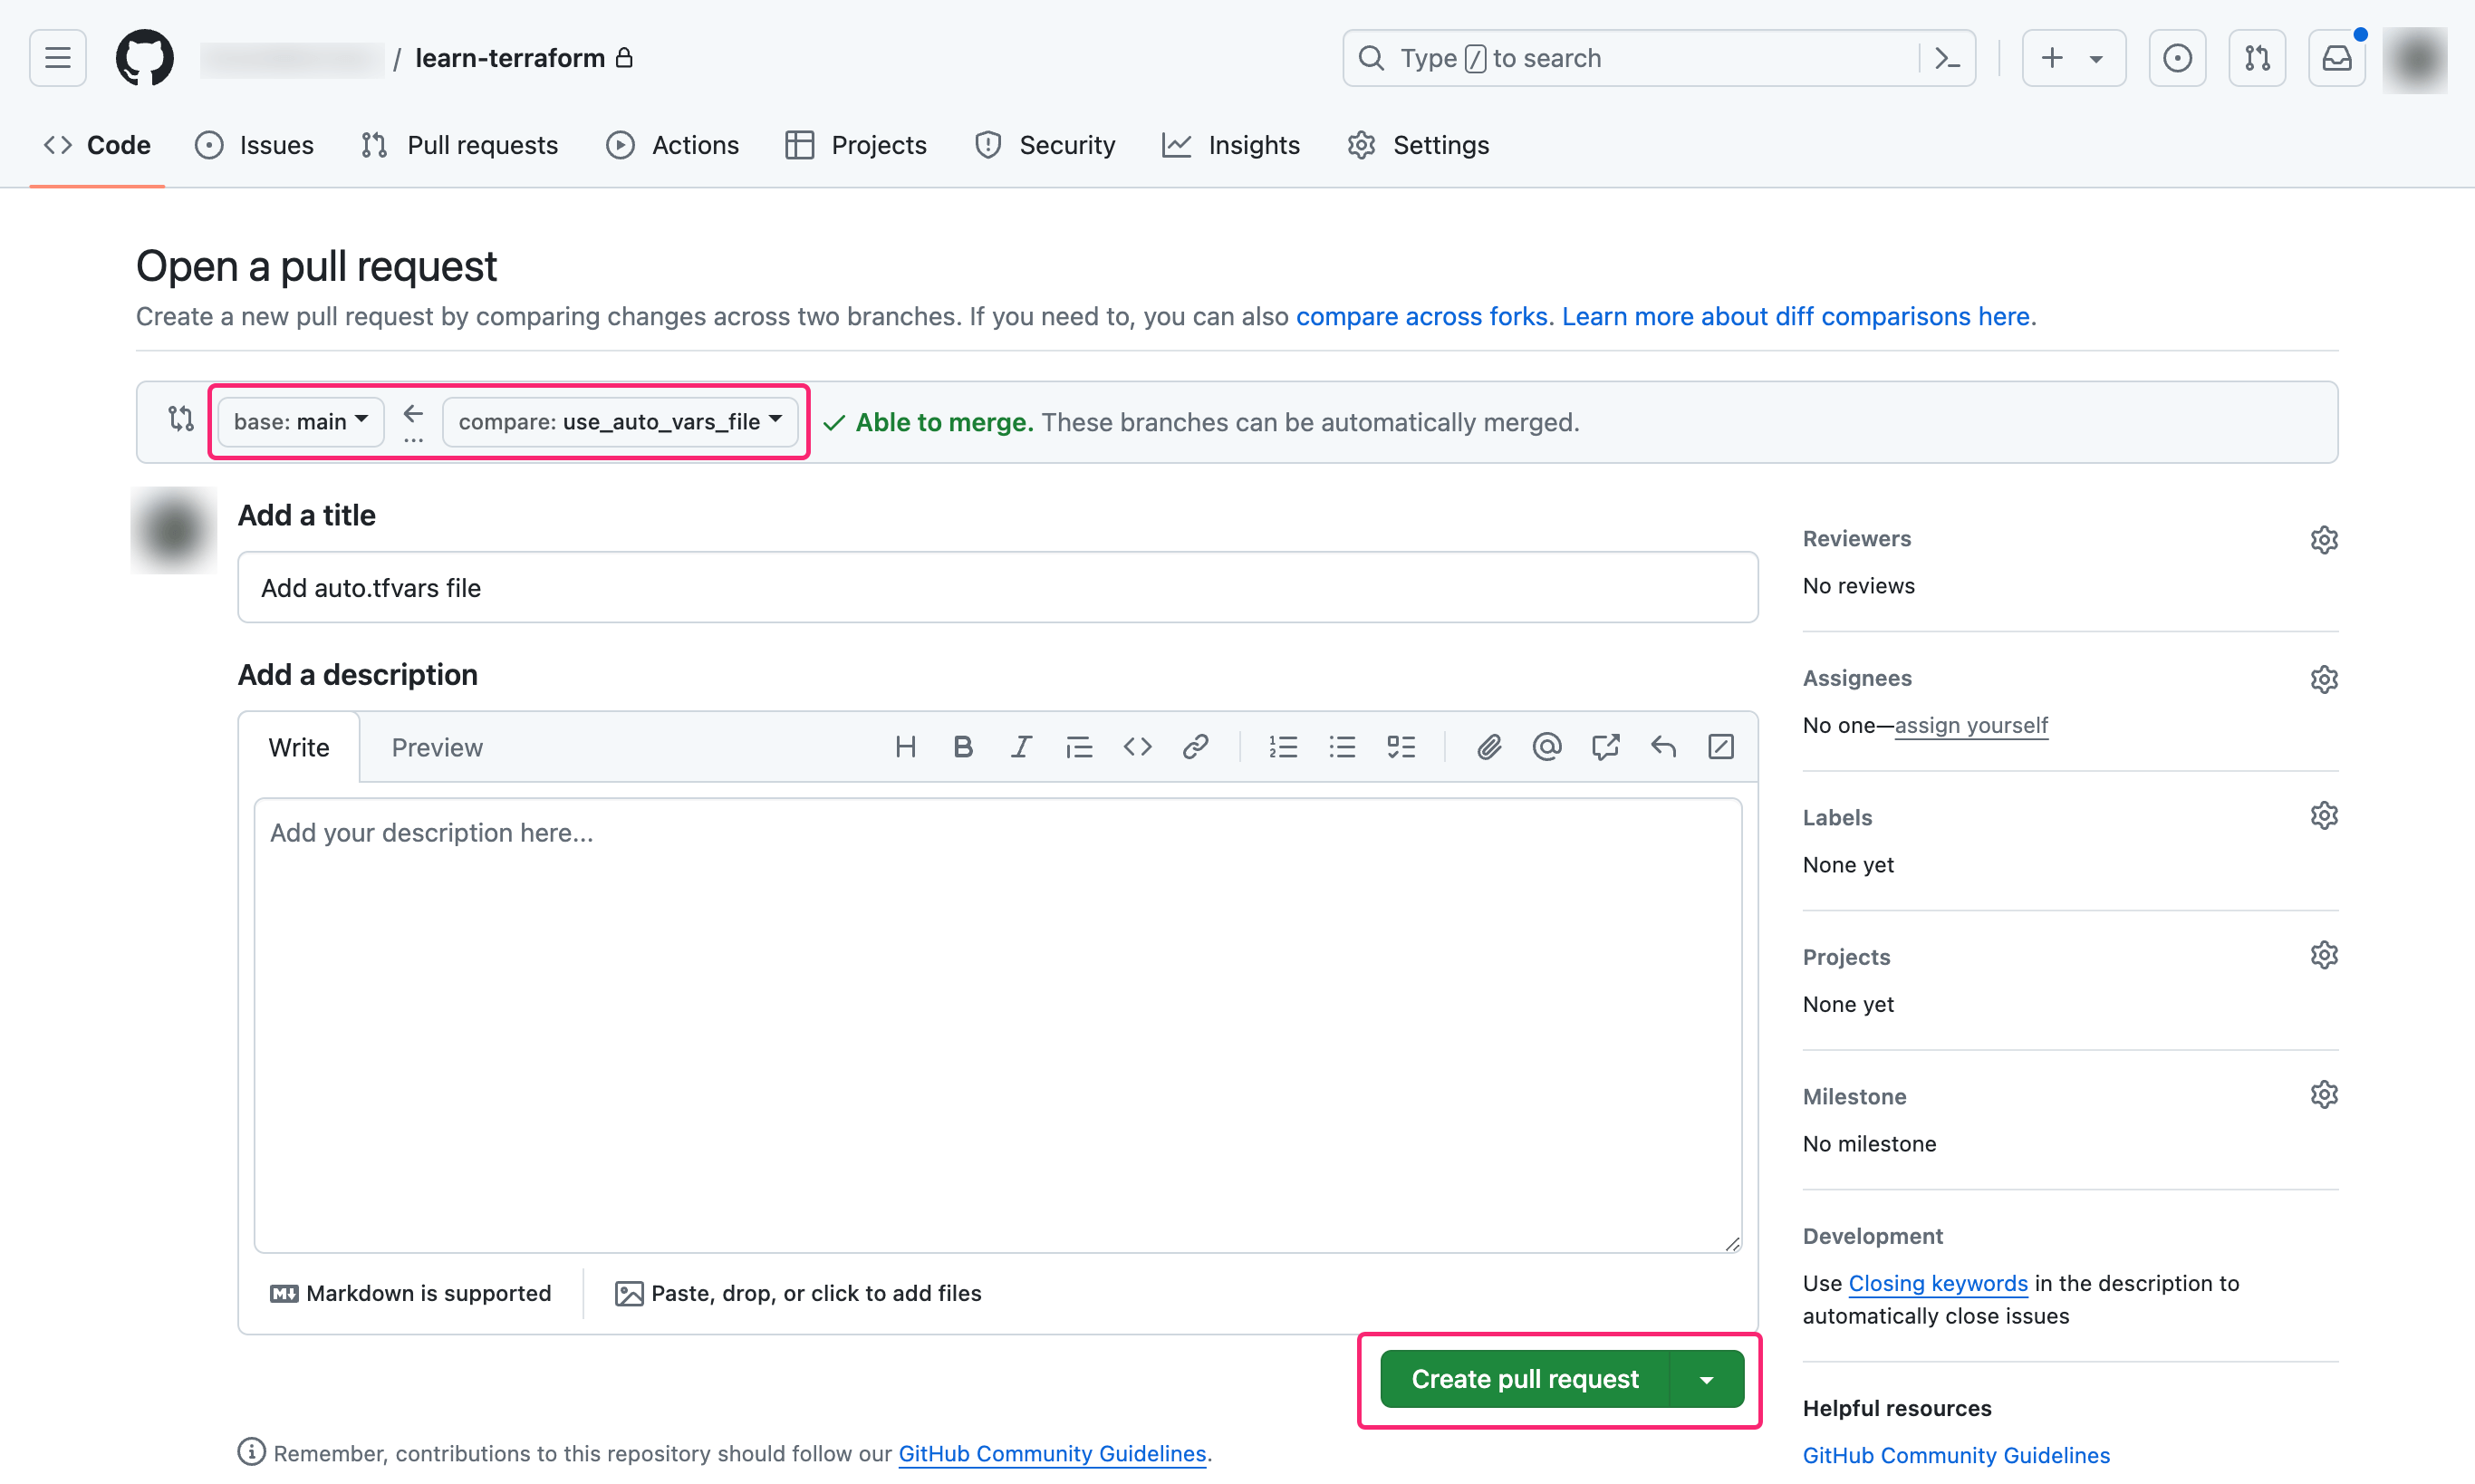 Open new pull request